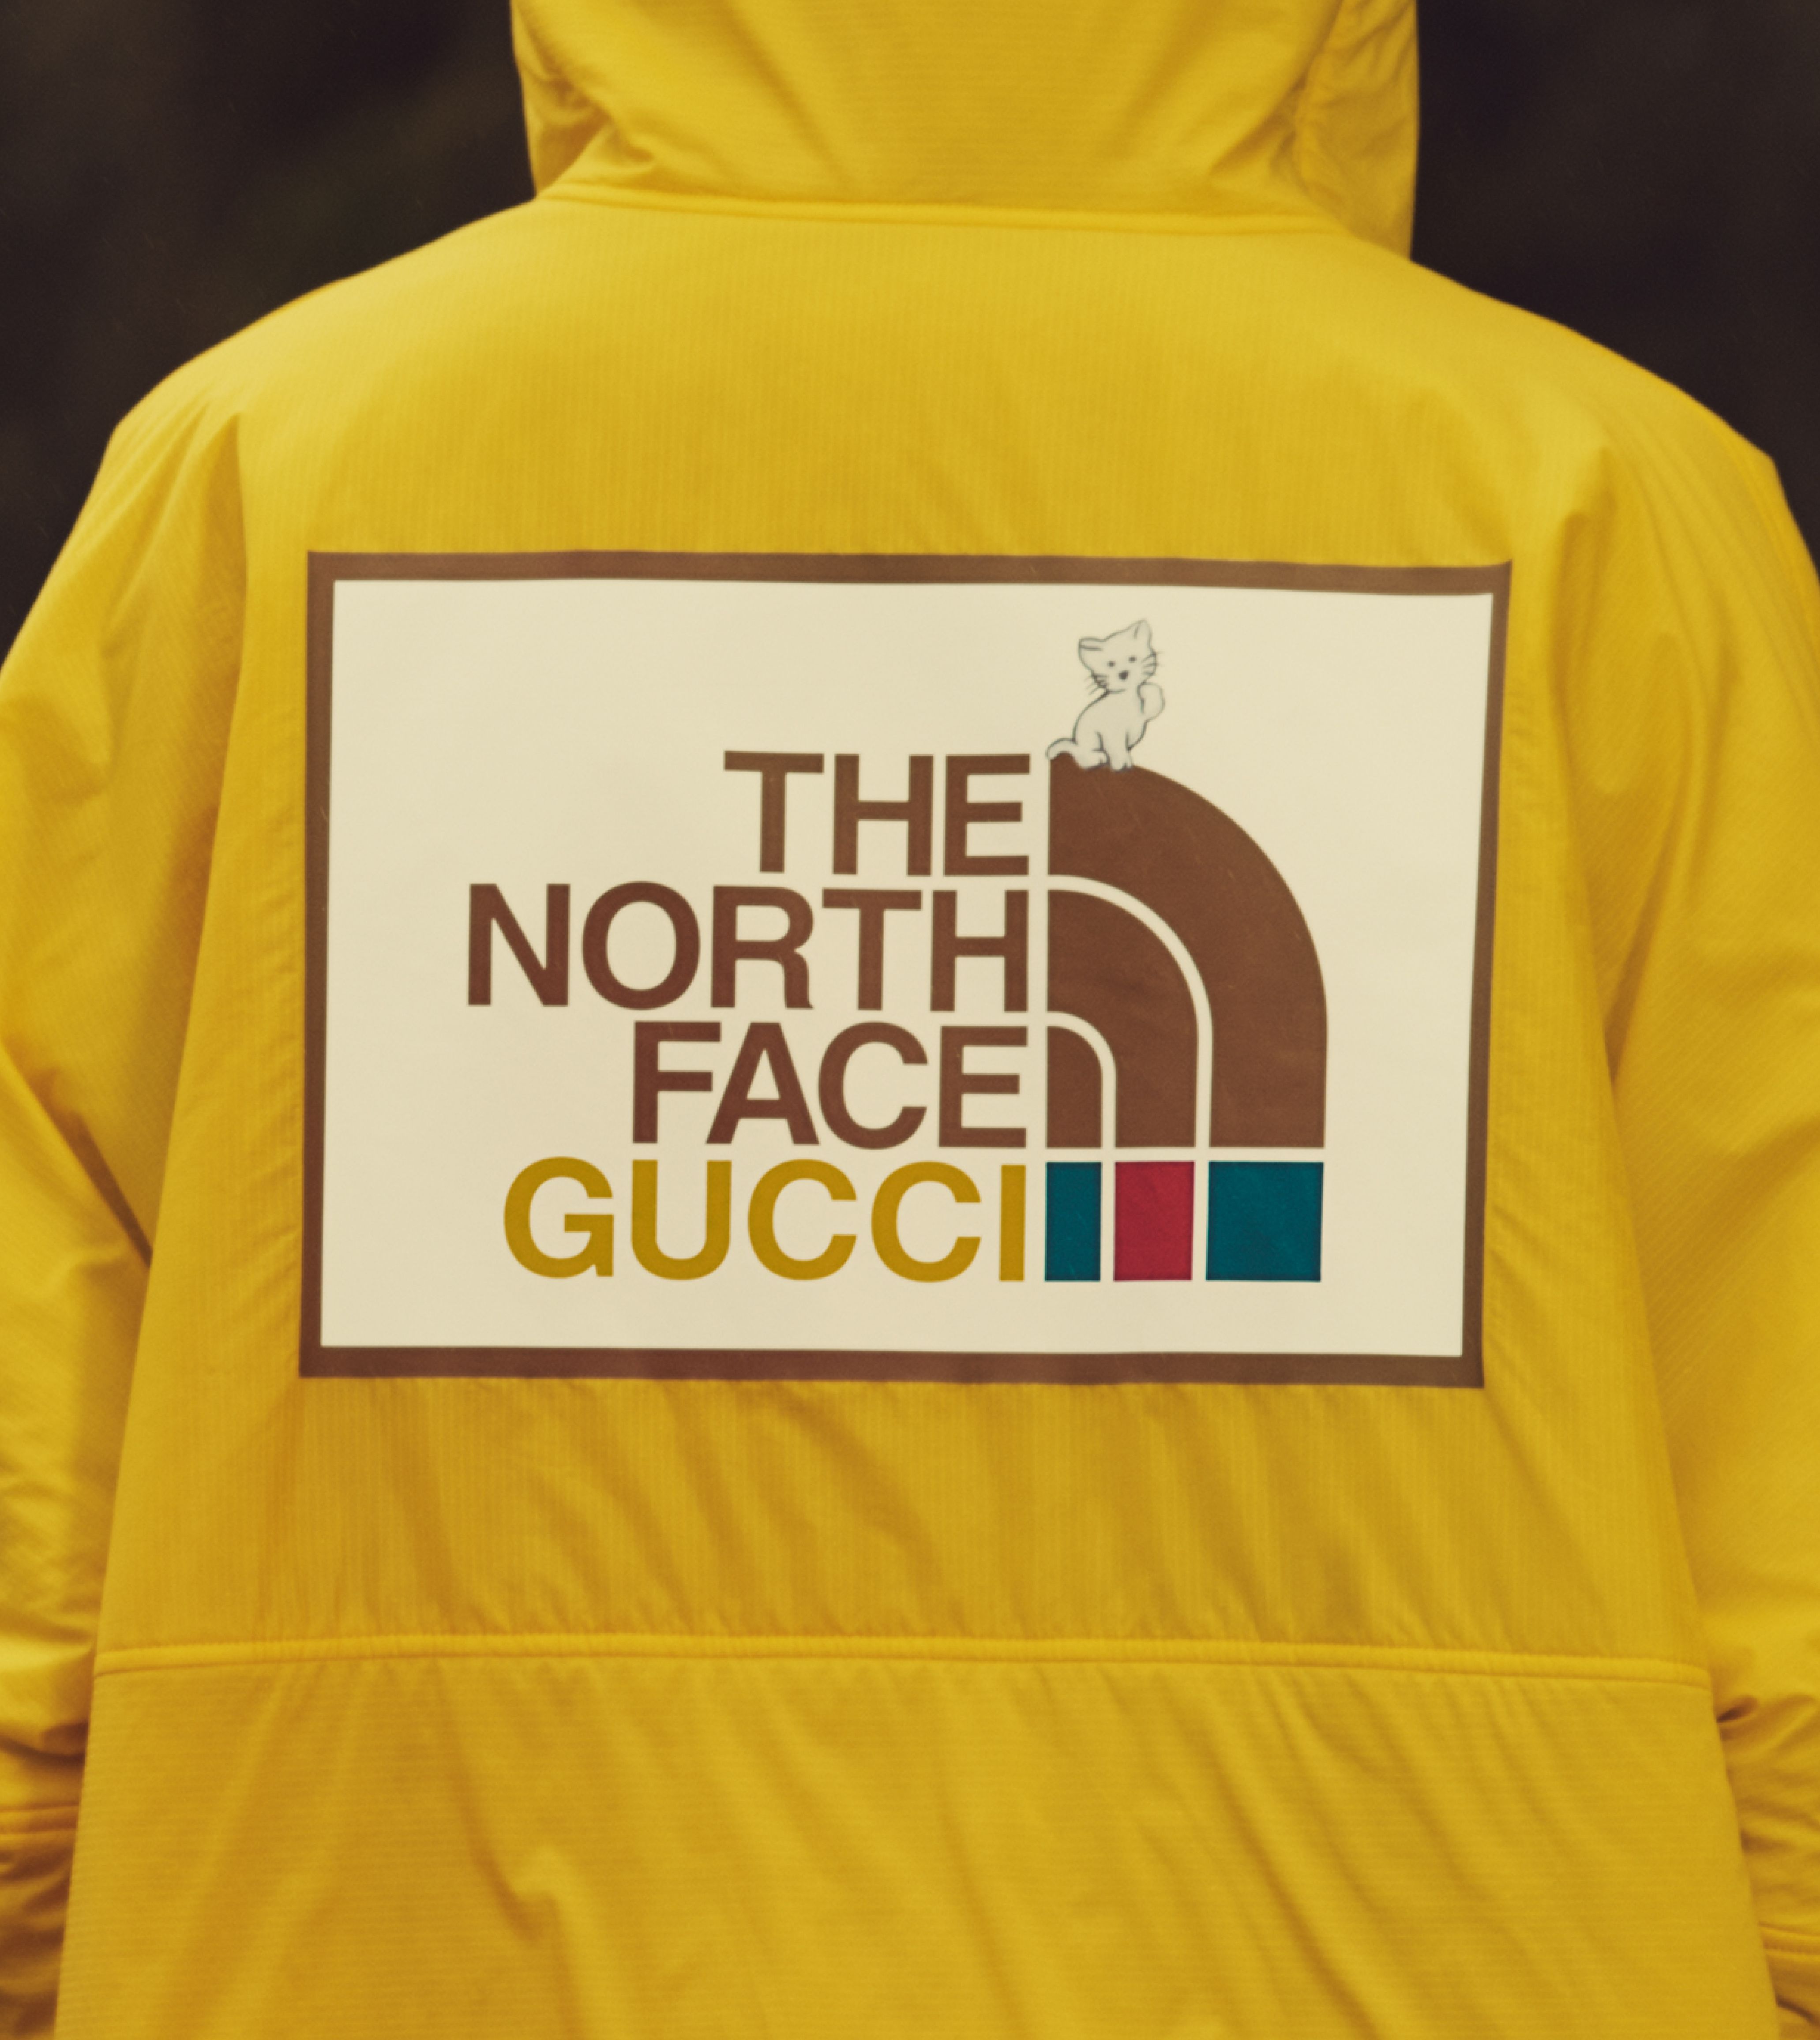 Gucci Teams Up With The North Face